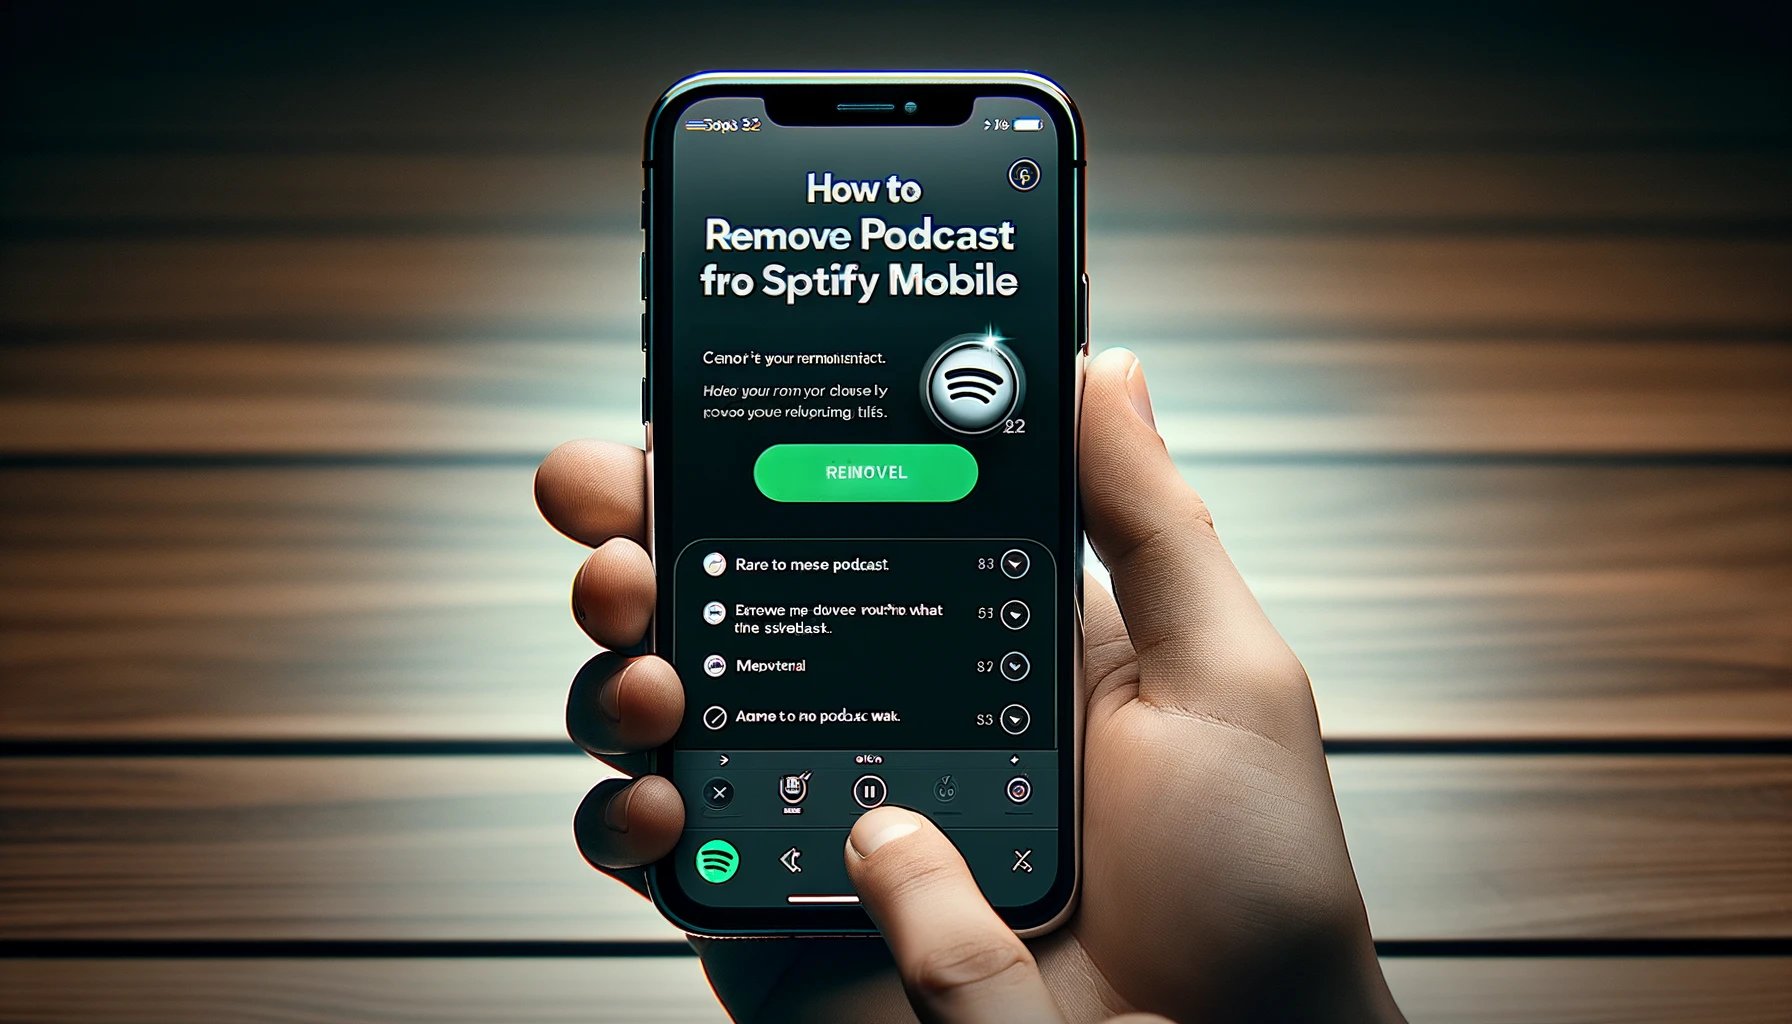 How to Remove Podcast from Spotify Mobile